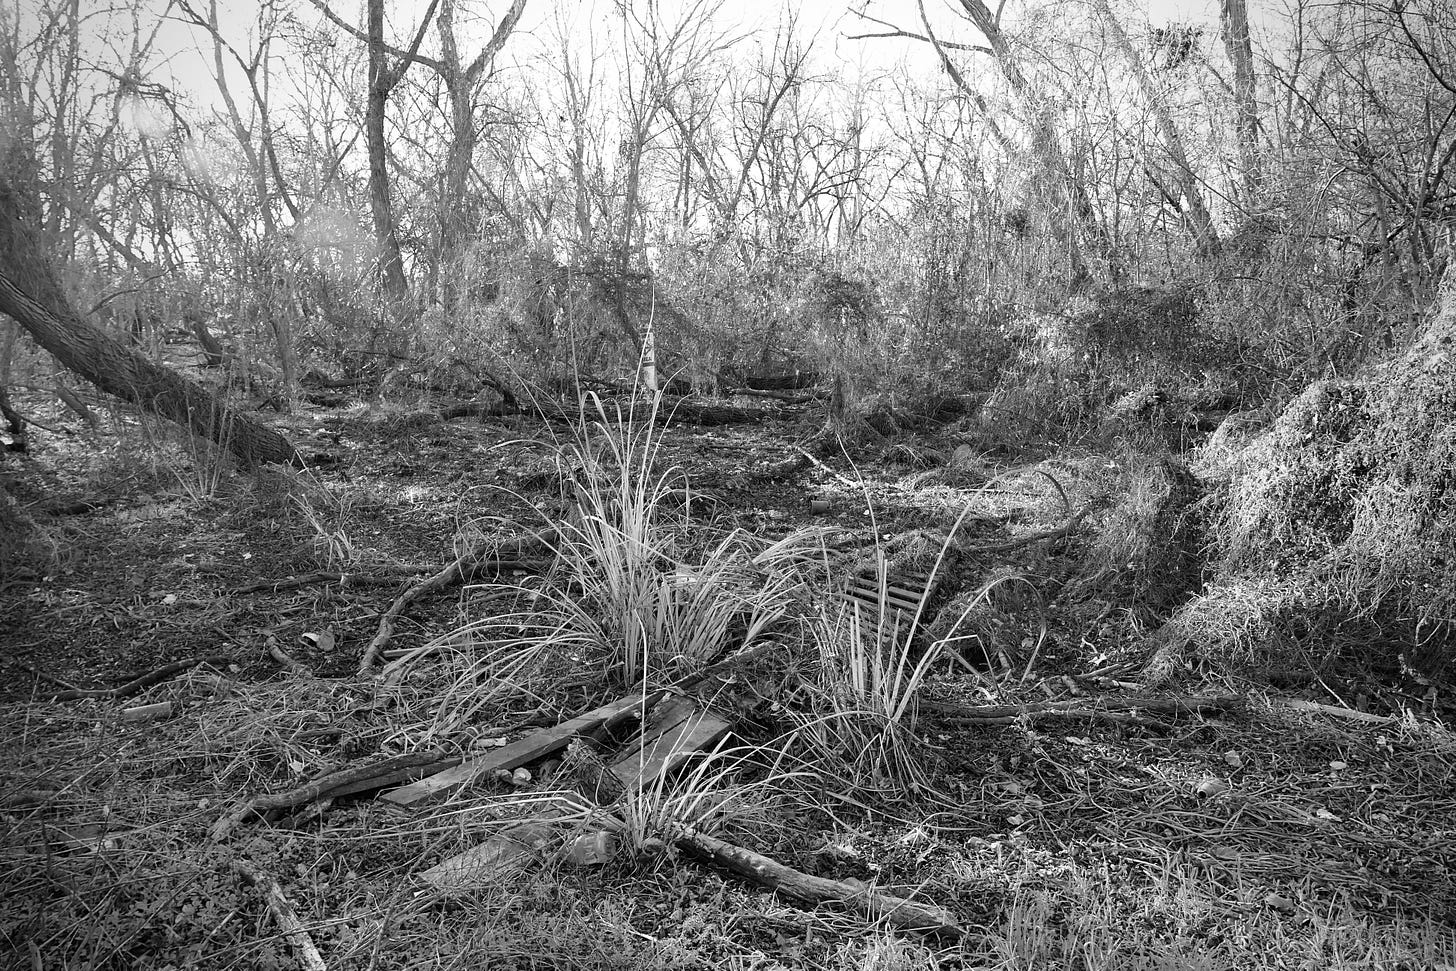 Black and white photo of a dried out edgeland creek, with flotsam lumber made into a crude bridge in the foreground, and a swim area buoy in the background